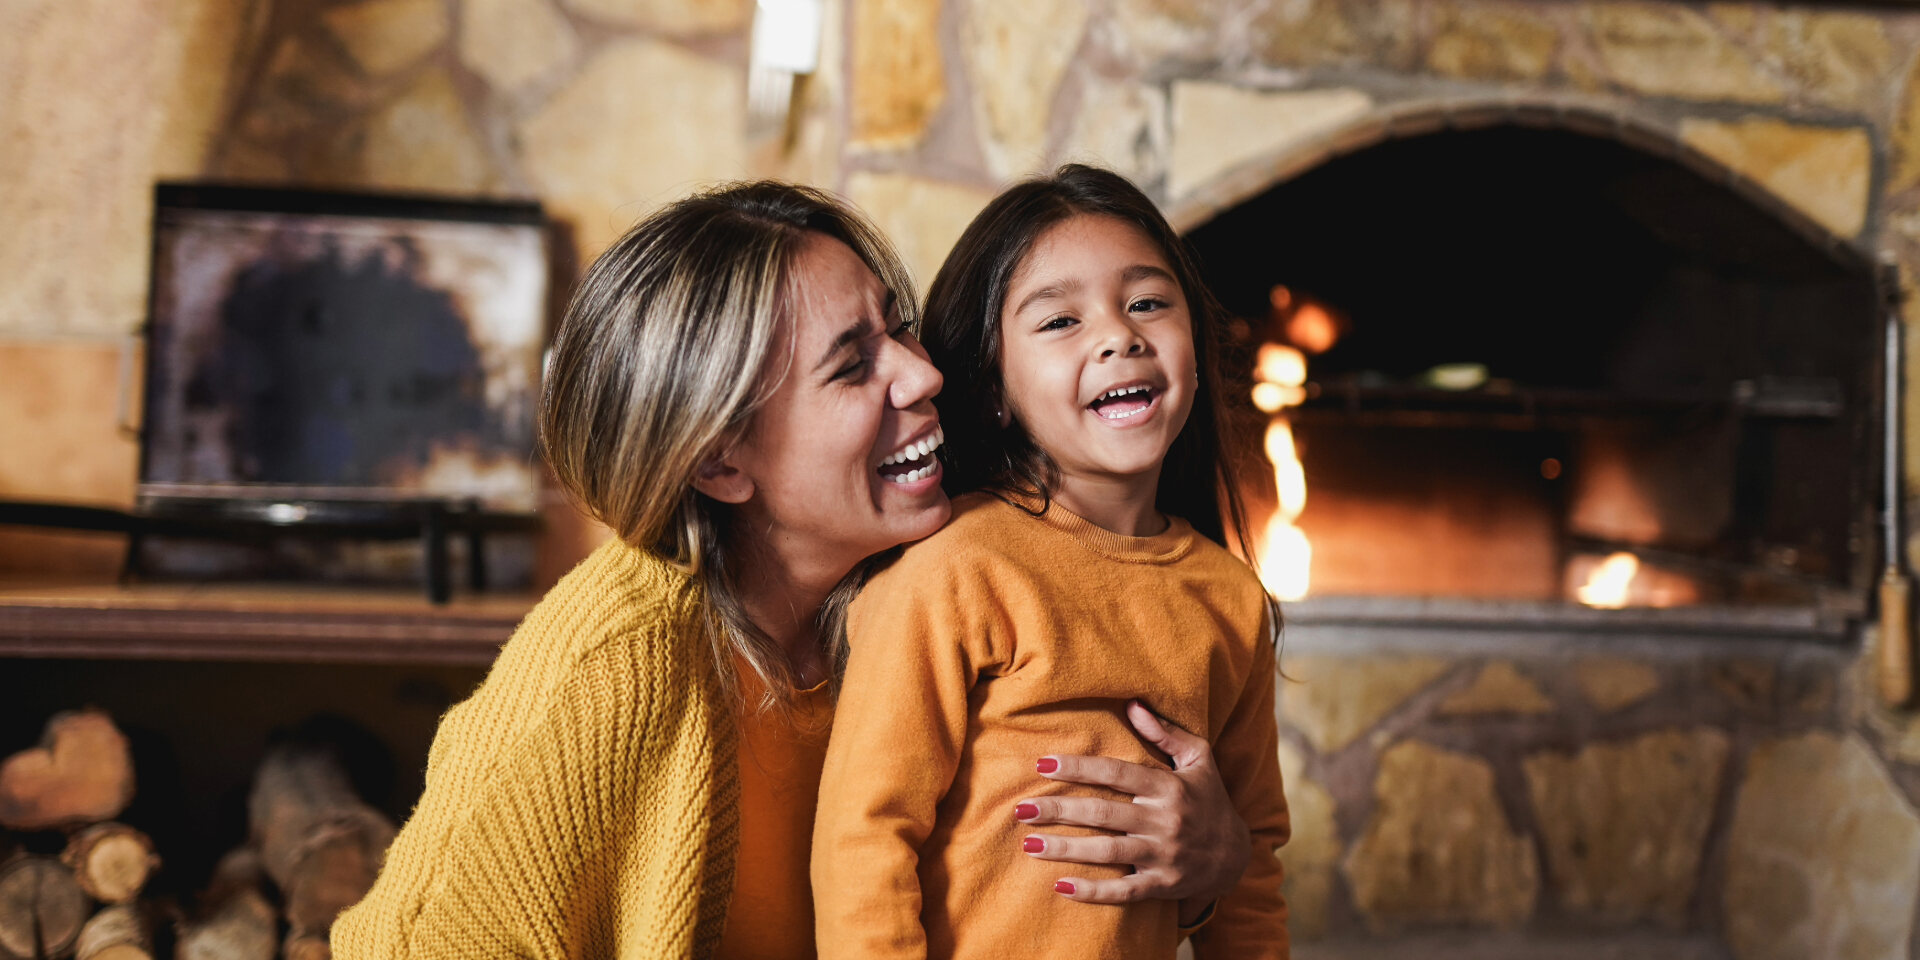 Investing in home warmth and safety with ManageLife